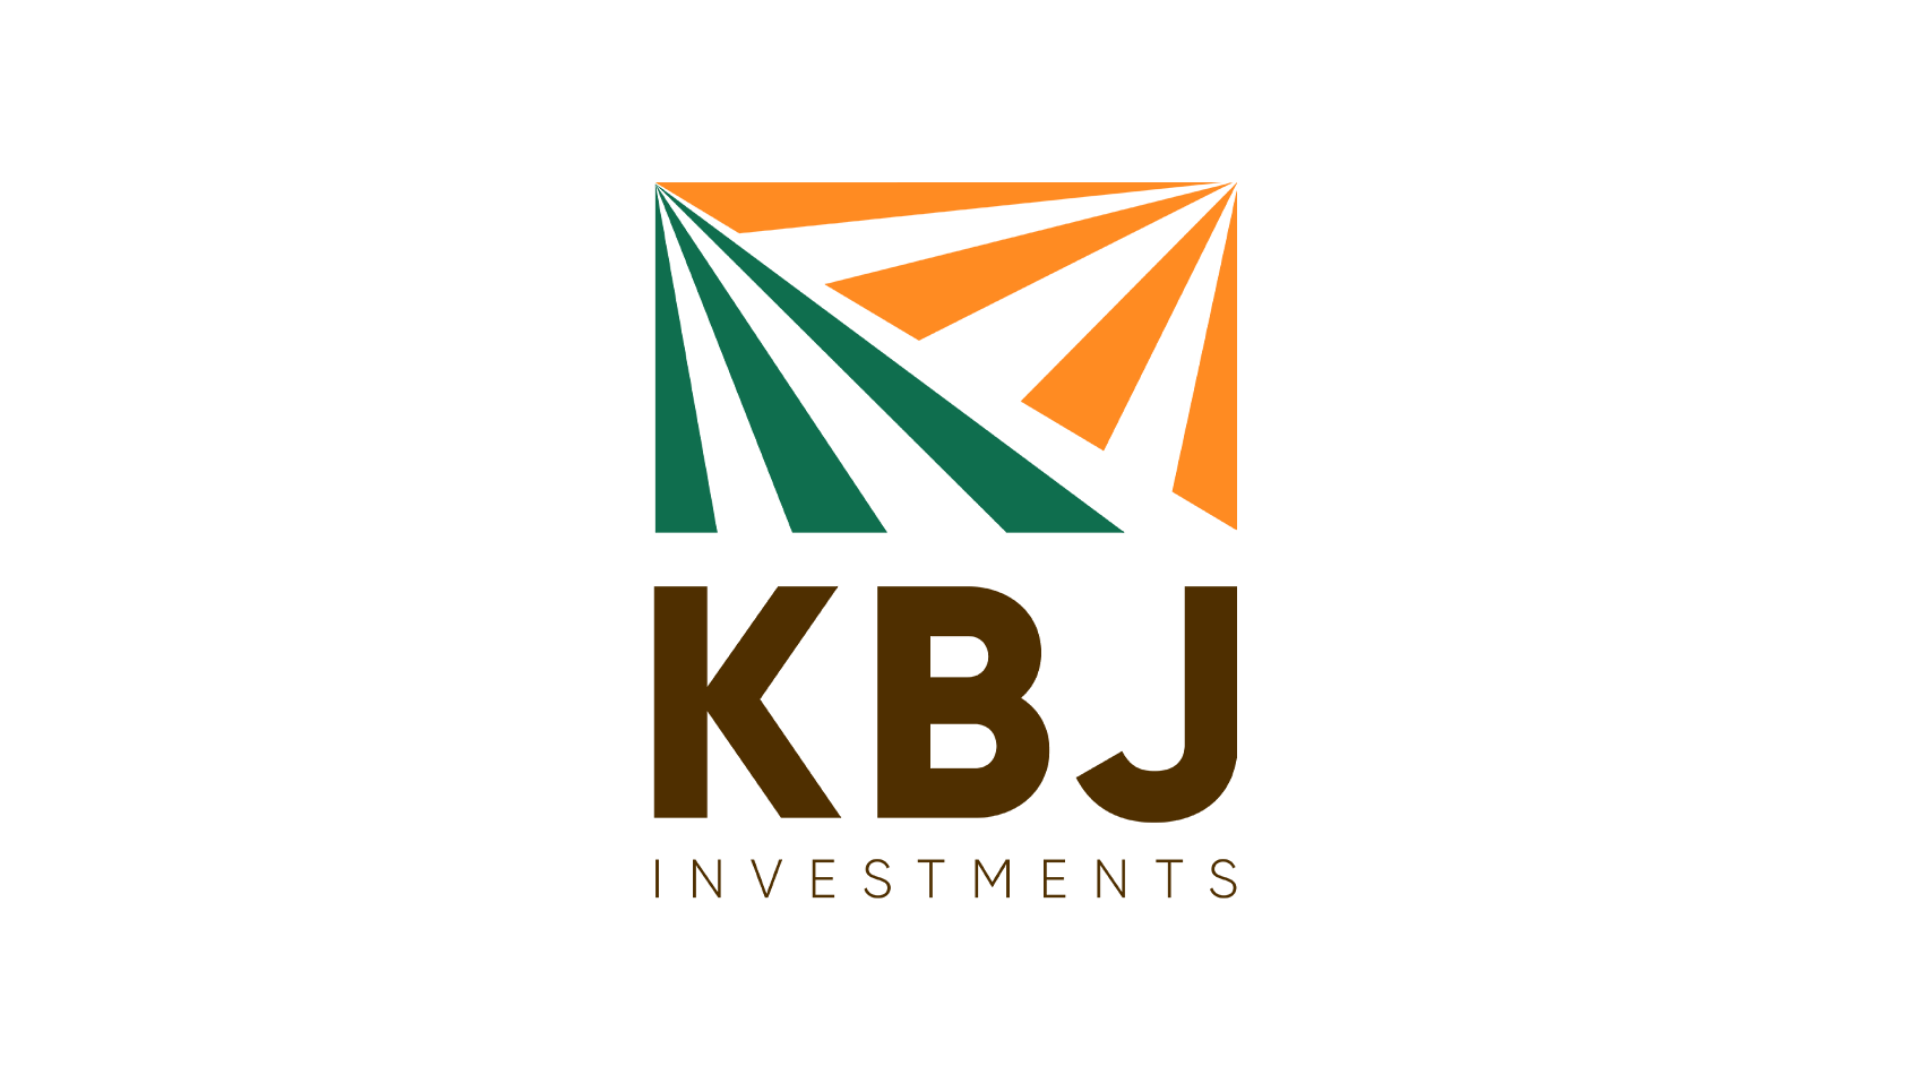 Begin-ups, properties, and trading- KBJ Group branches out with a brand new funding firm